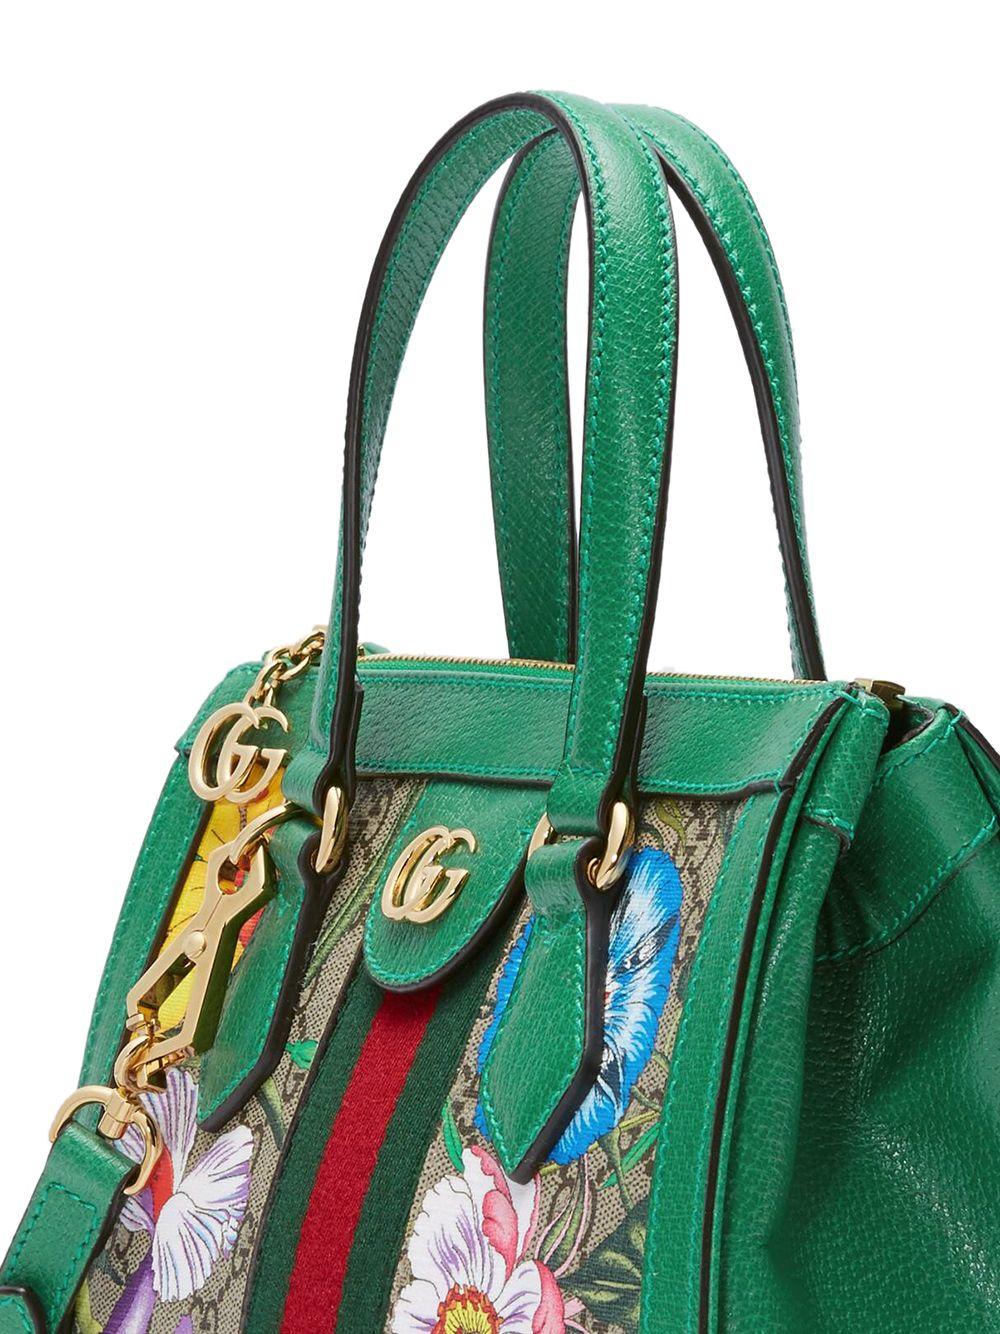 Gucci Ophidia Floral Pattern Tote Bag in Green | Lyst